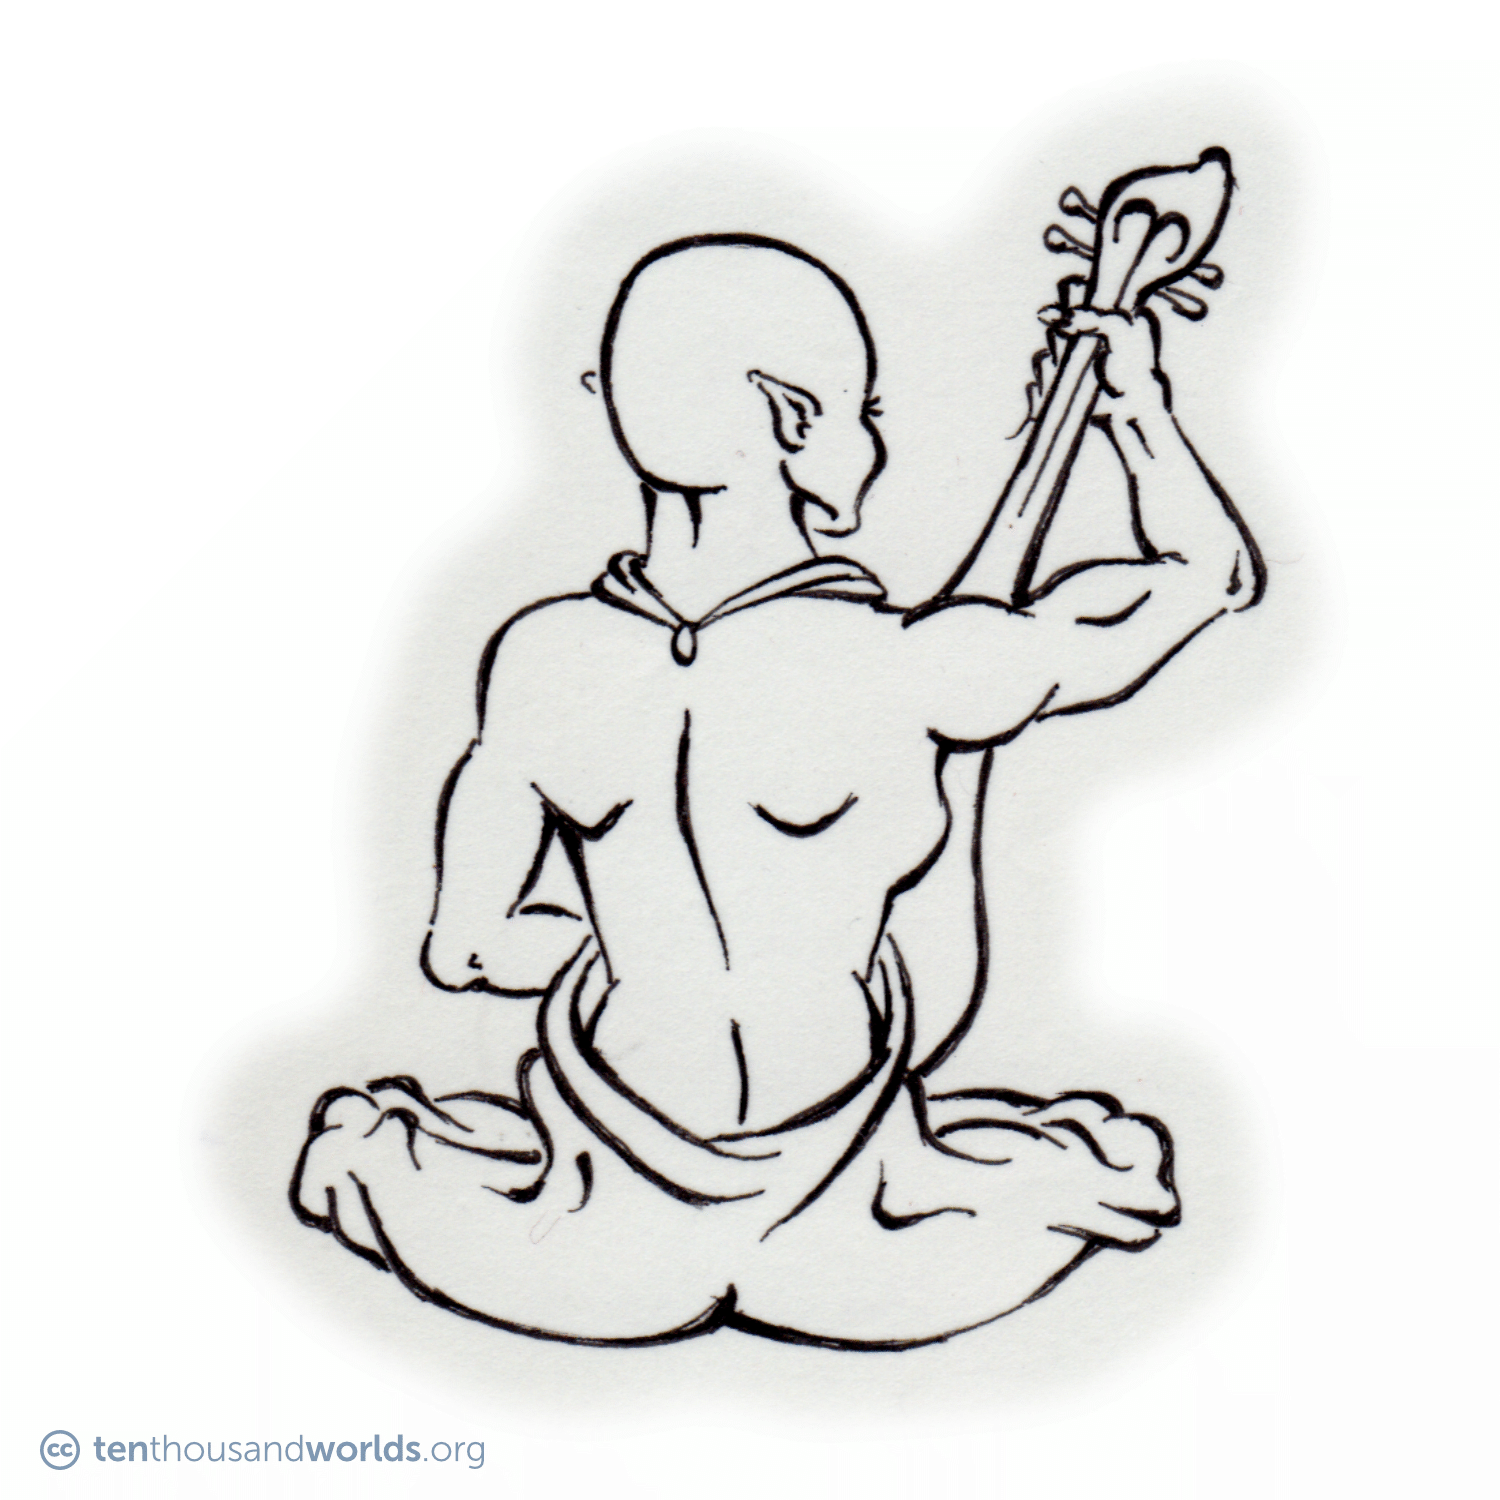 An ink outline. Approached from behind: a human-like being with pointed ears and a hairless head, sitting cross-legged in loose robes, playing a lute-like instrument.